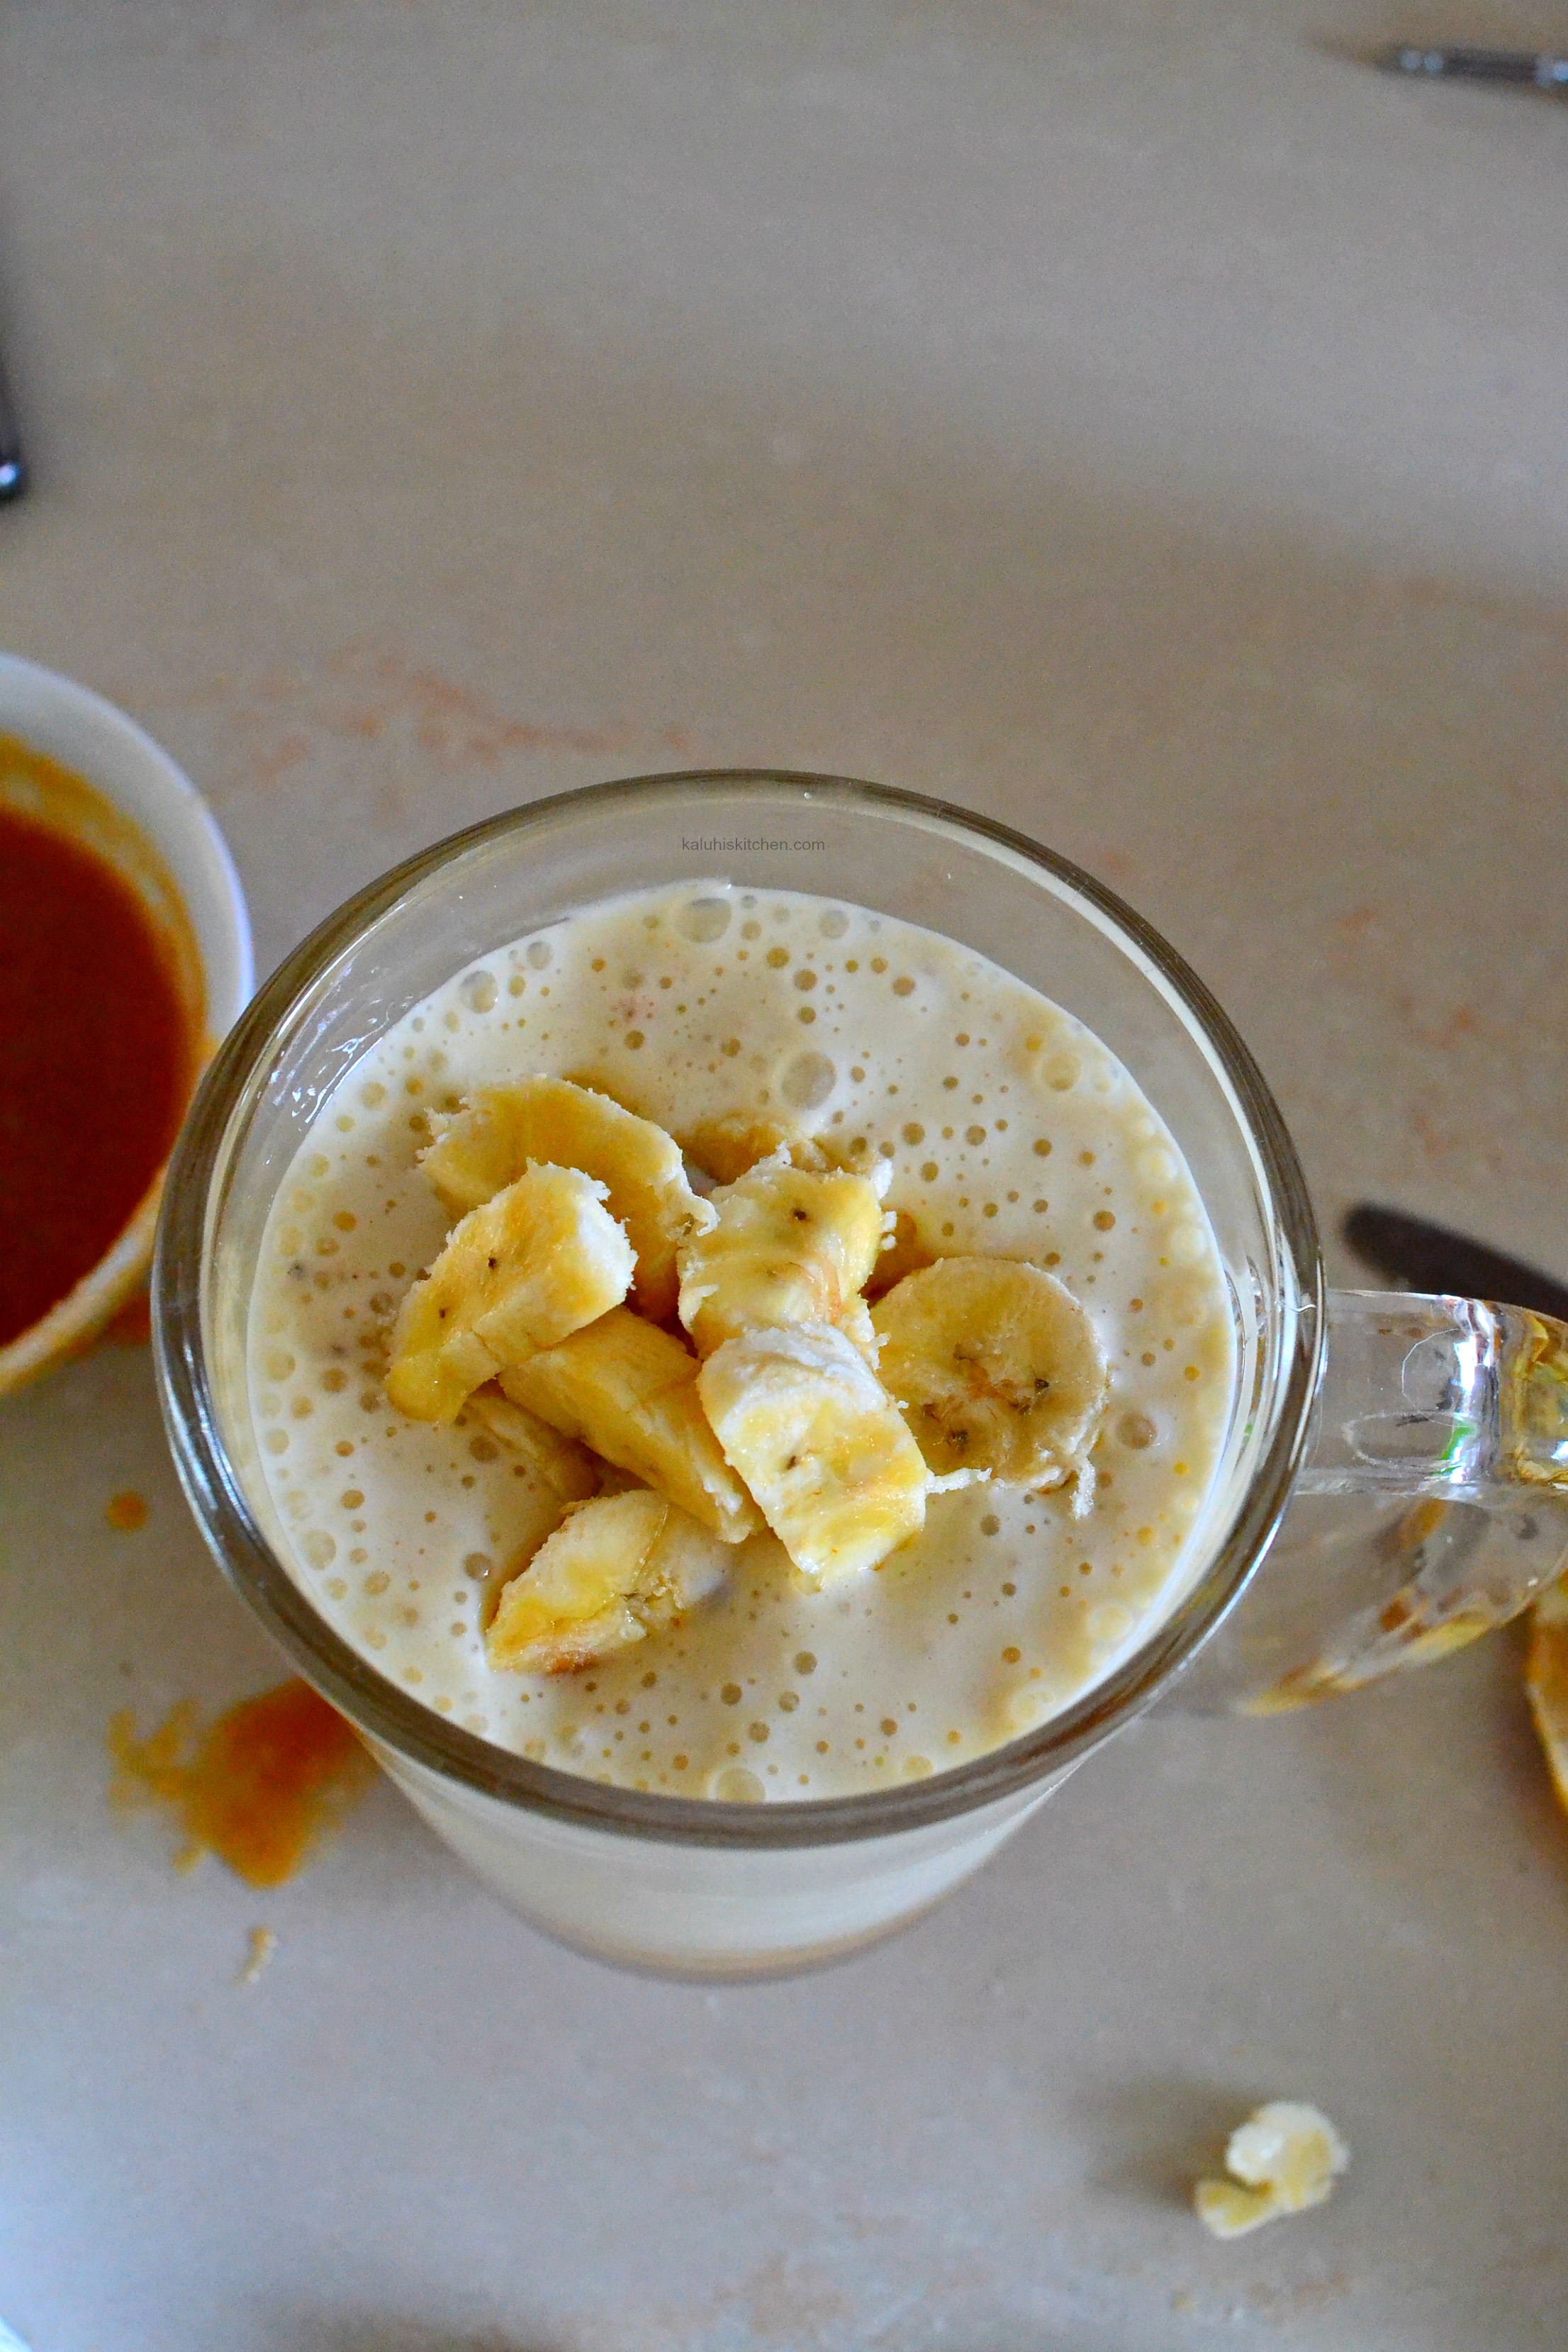 garnish-your-milkshake-with-some-fresh-banana-to-provide-some-balance-to-the-smoothie-and-compliment-the-inherent-banana-flavor_kaluhiskitchen-com